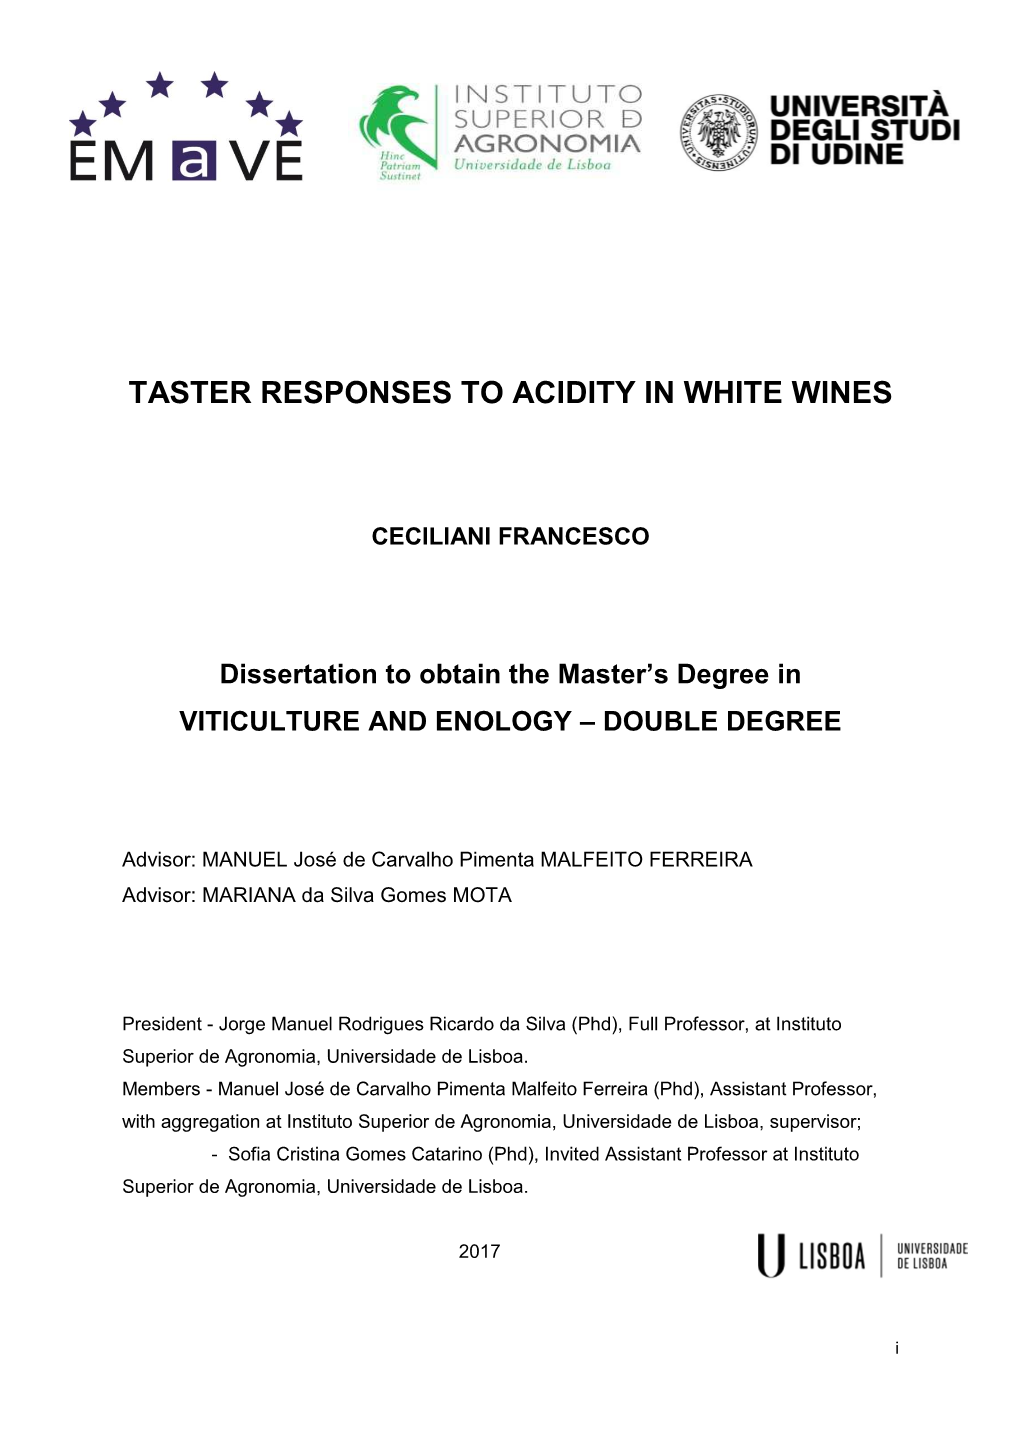 Taster Responses to Acidity in White Wines